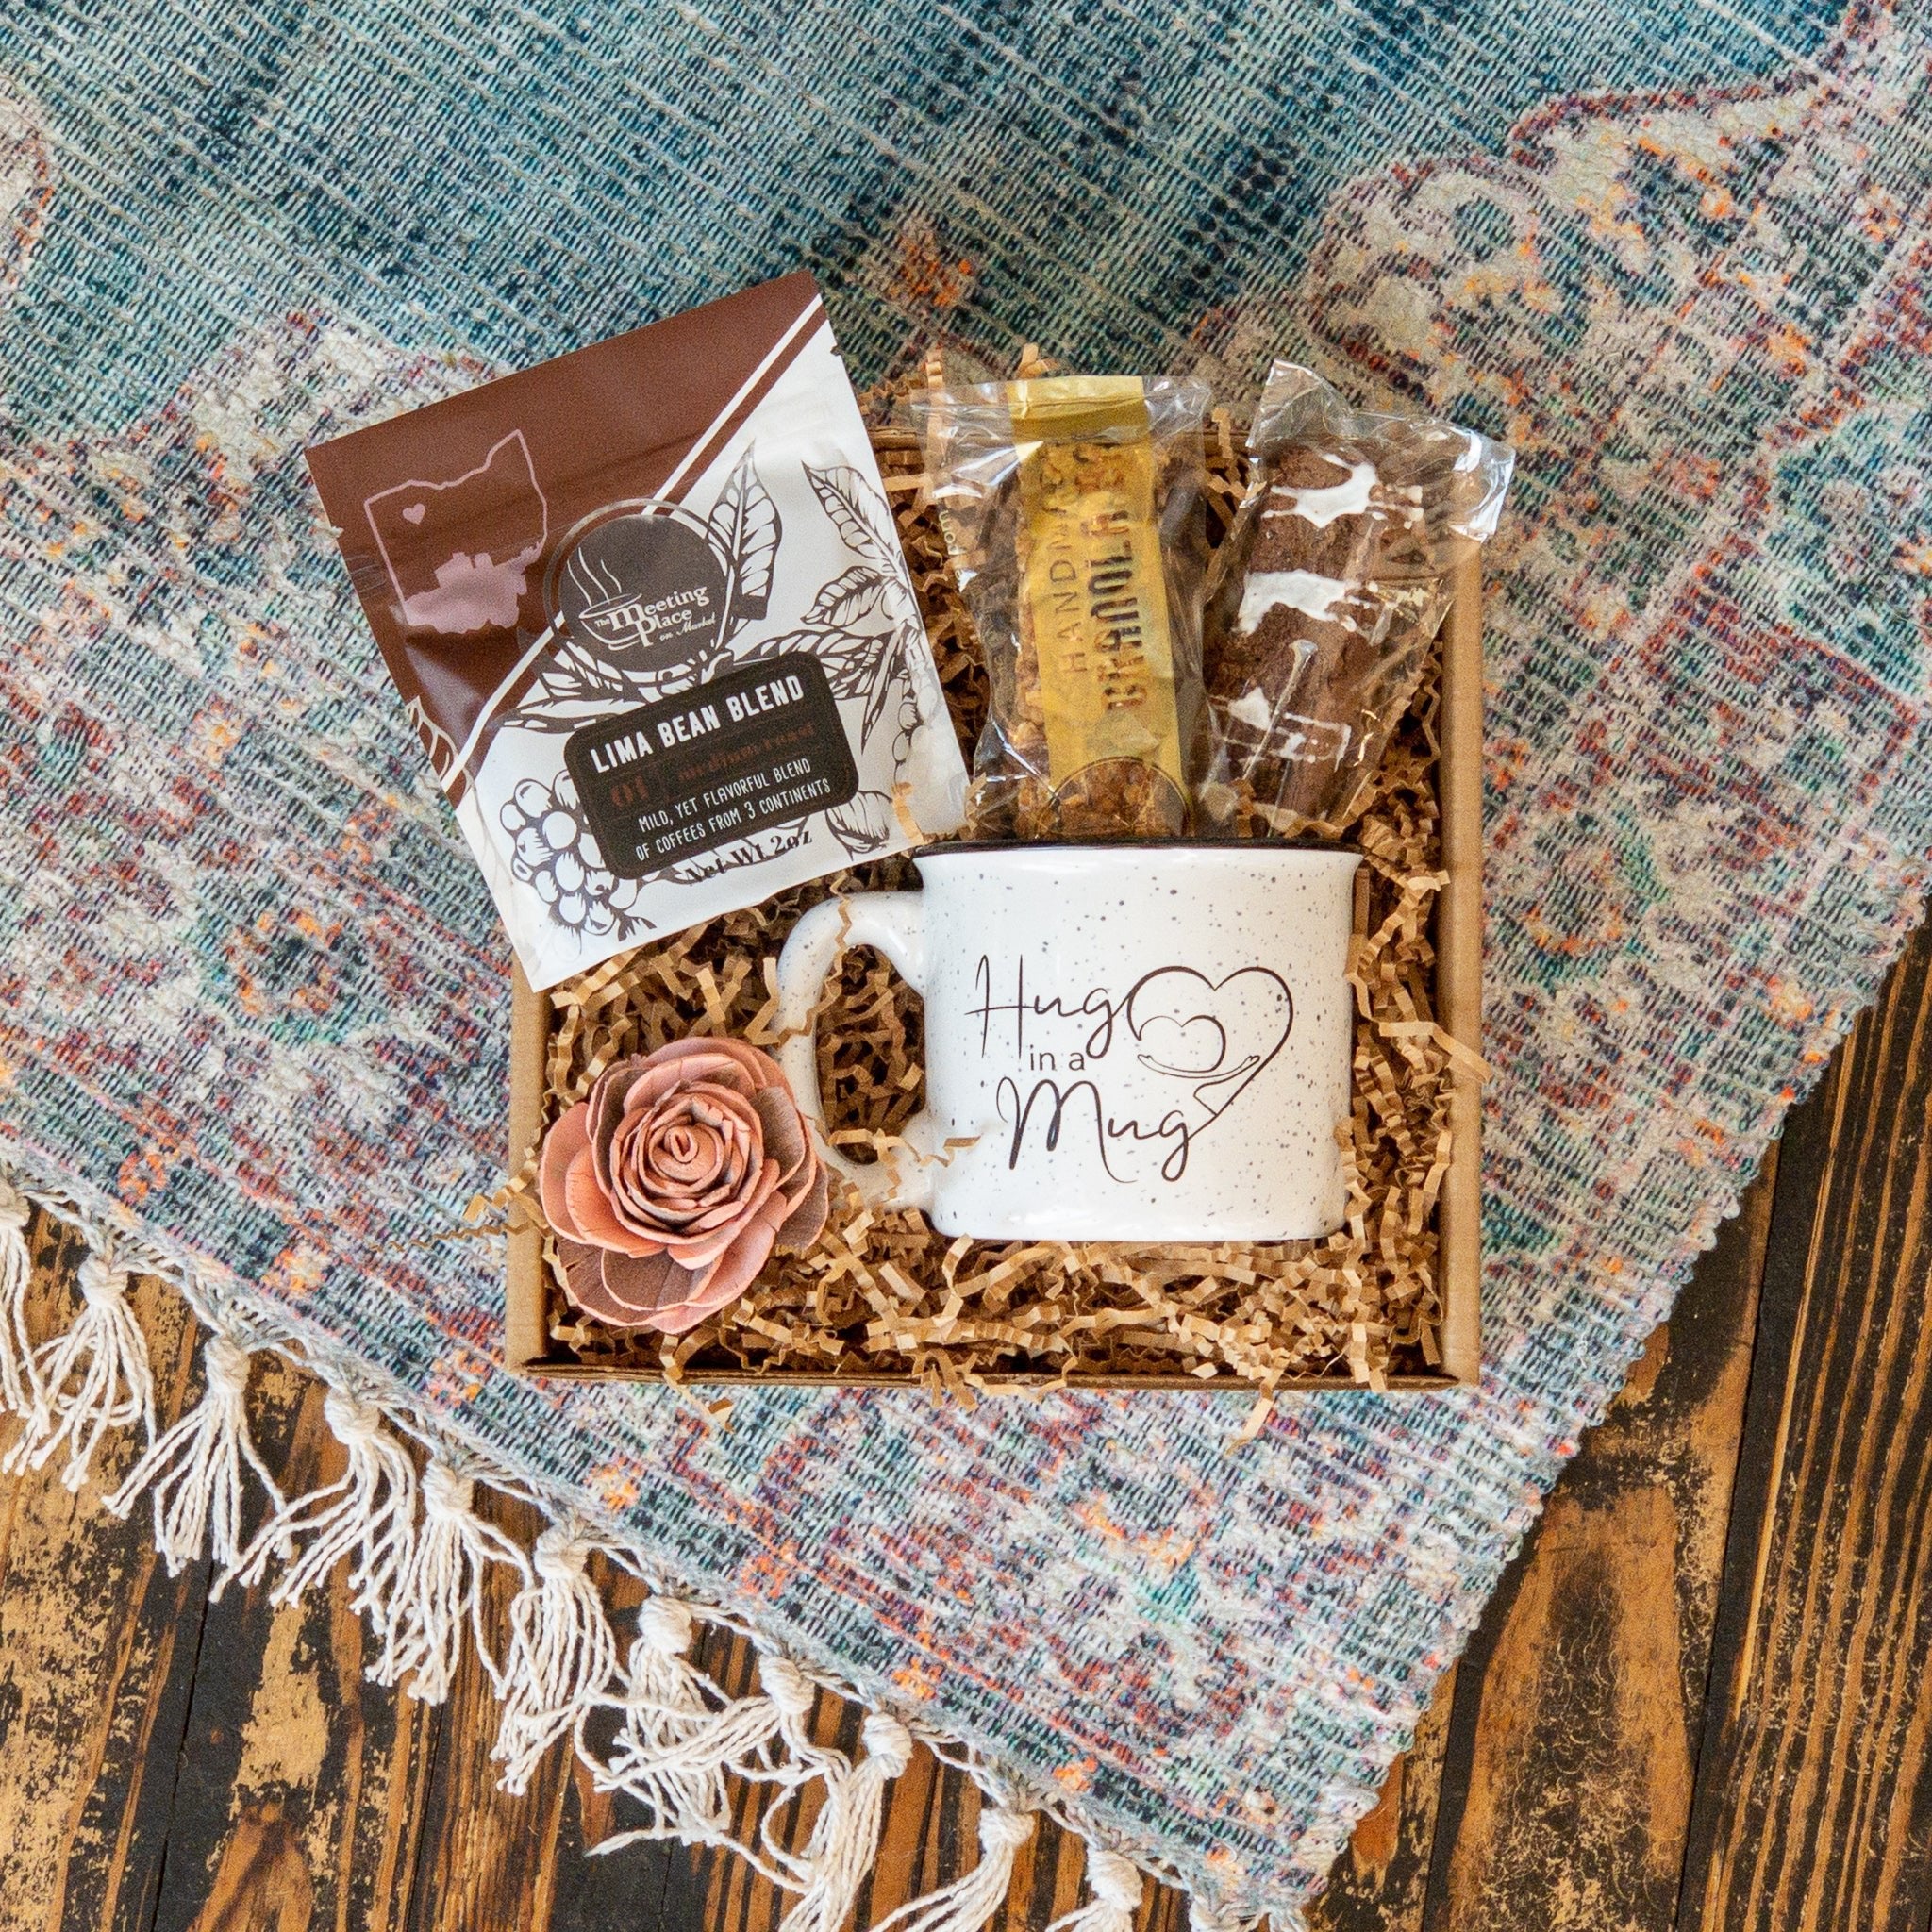 Hug in a Mug Coffee Lover Gift Basket | Thinking of You Gift Box Valentine's Day Gift - The Meeting Place on Market